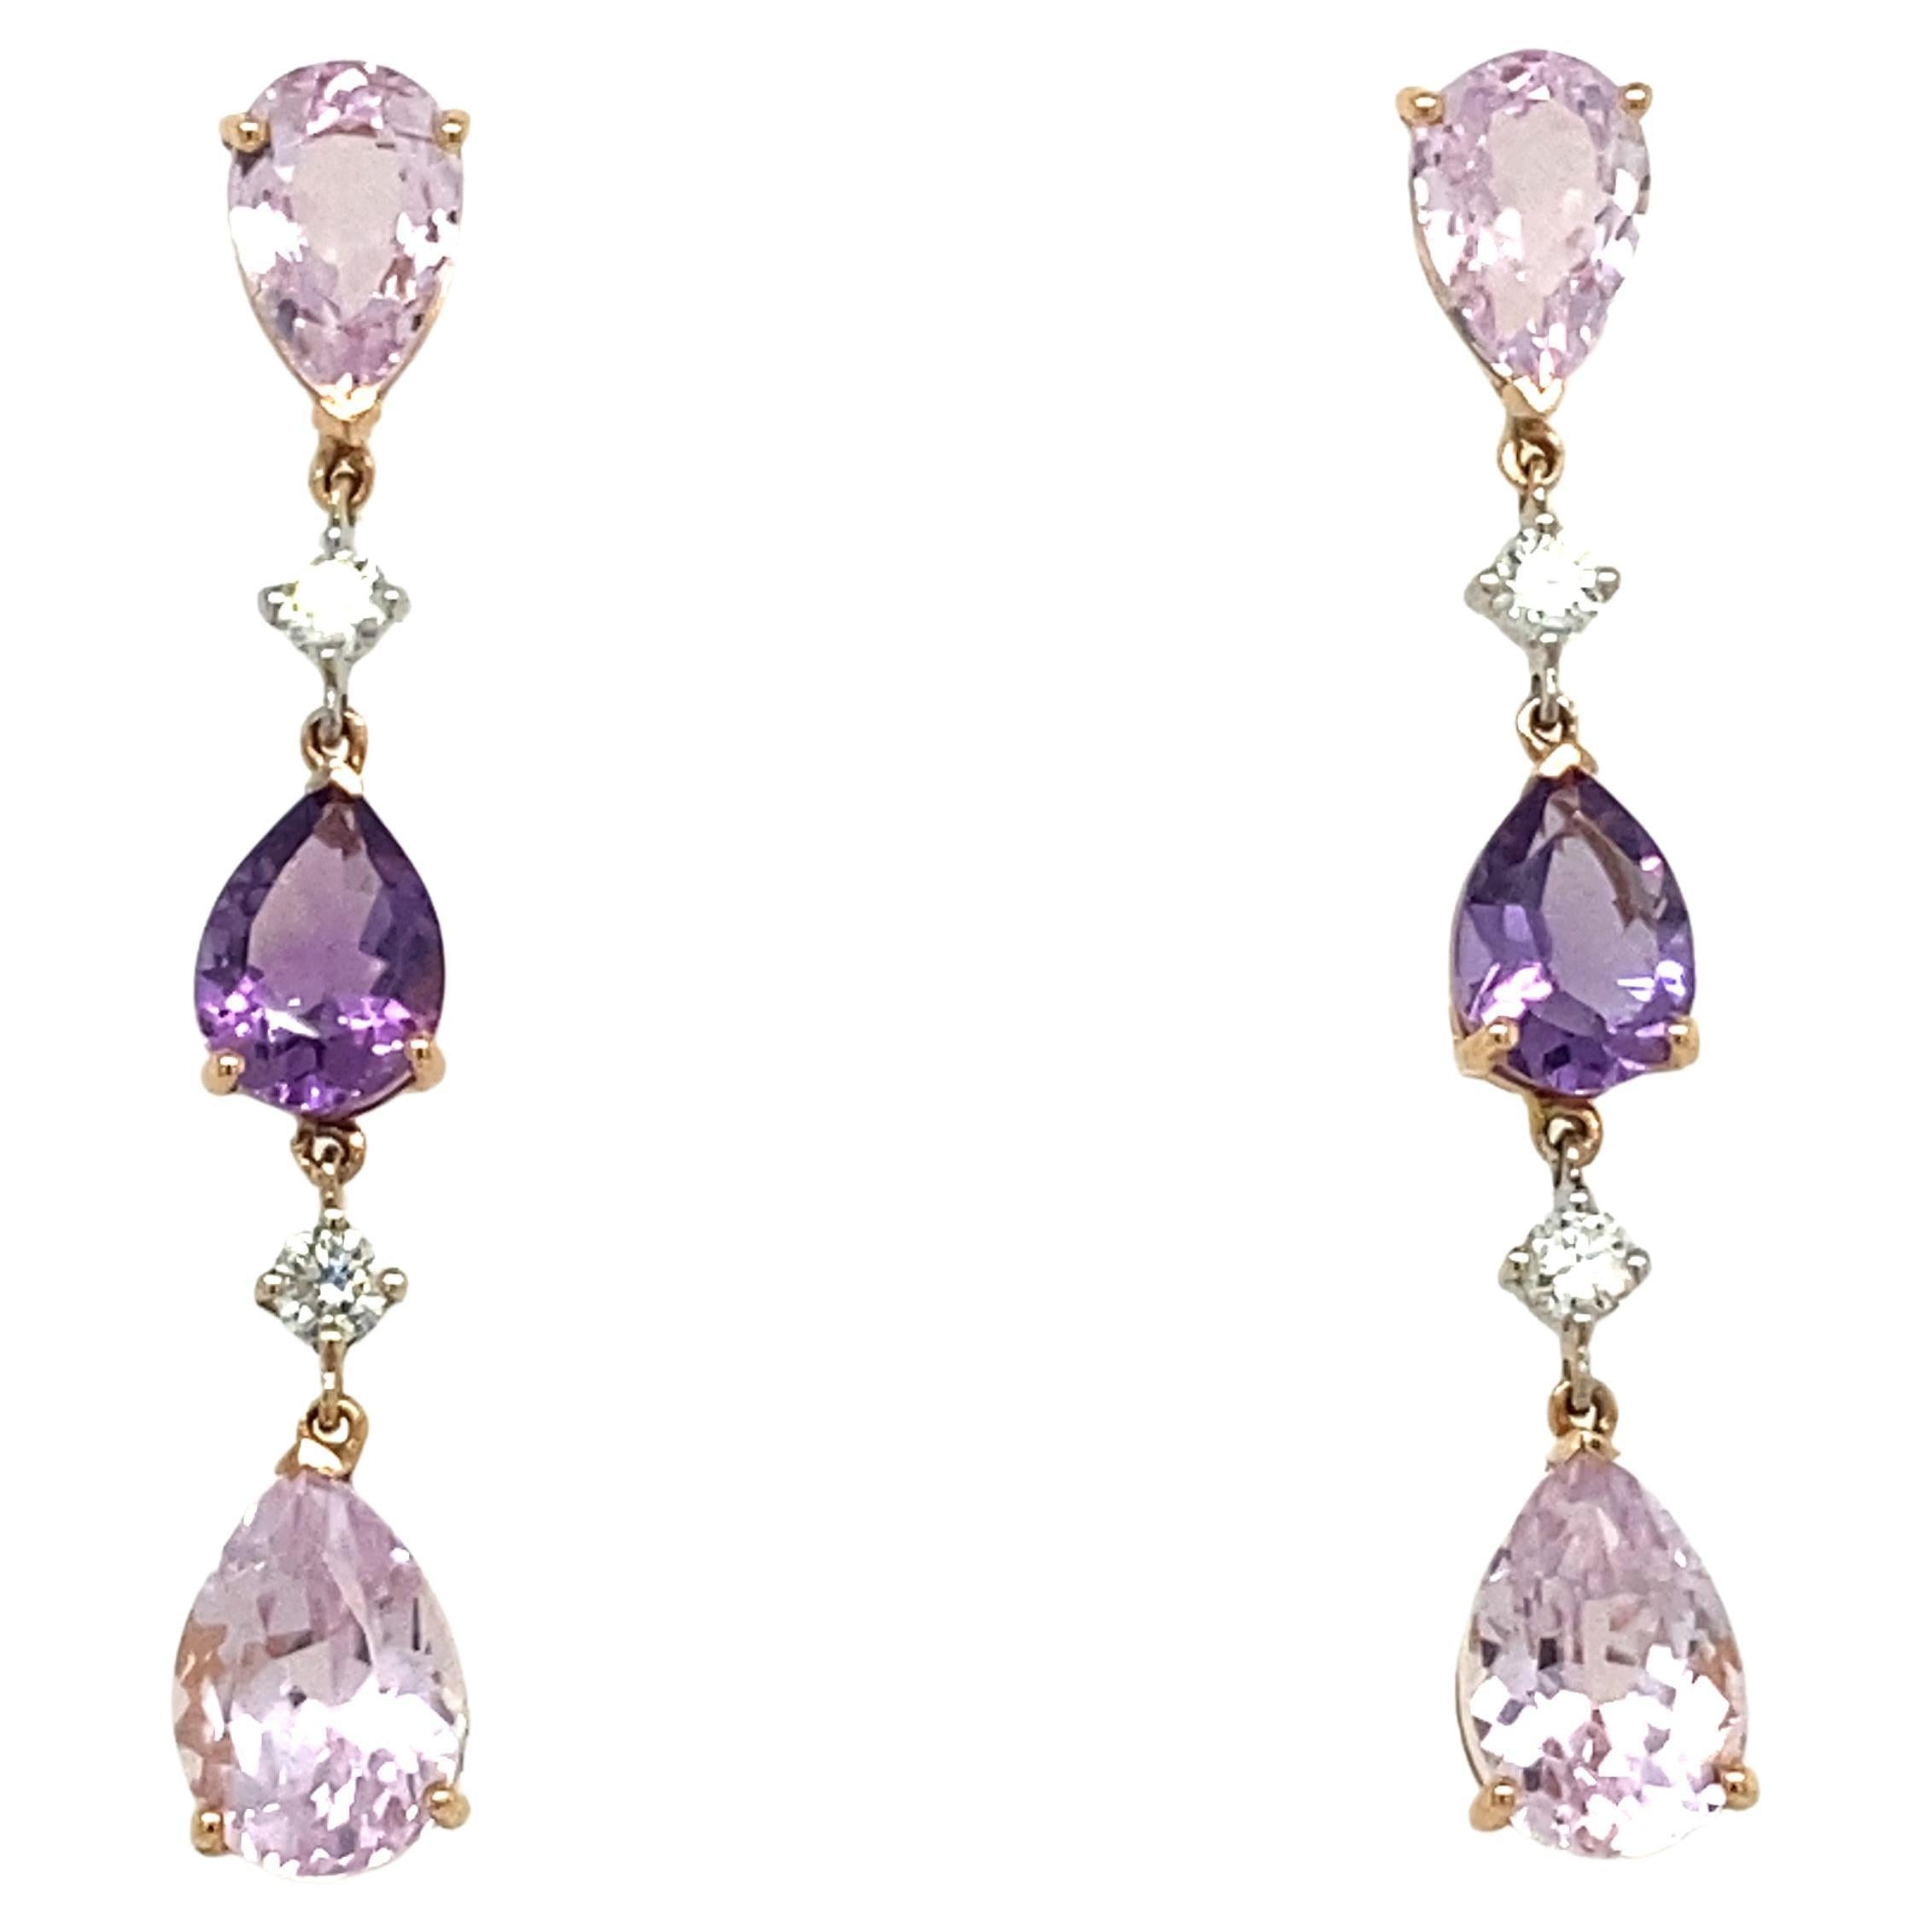 Dangling French Earrings with Diamonds, Amethyst and Kunzites For Sale